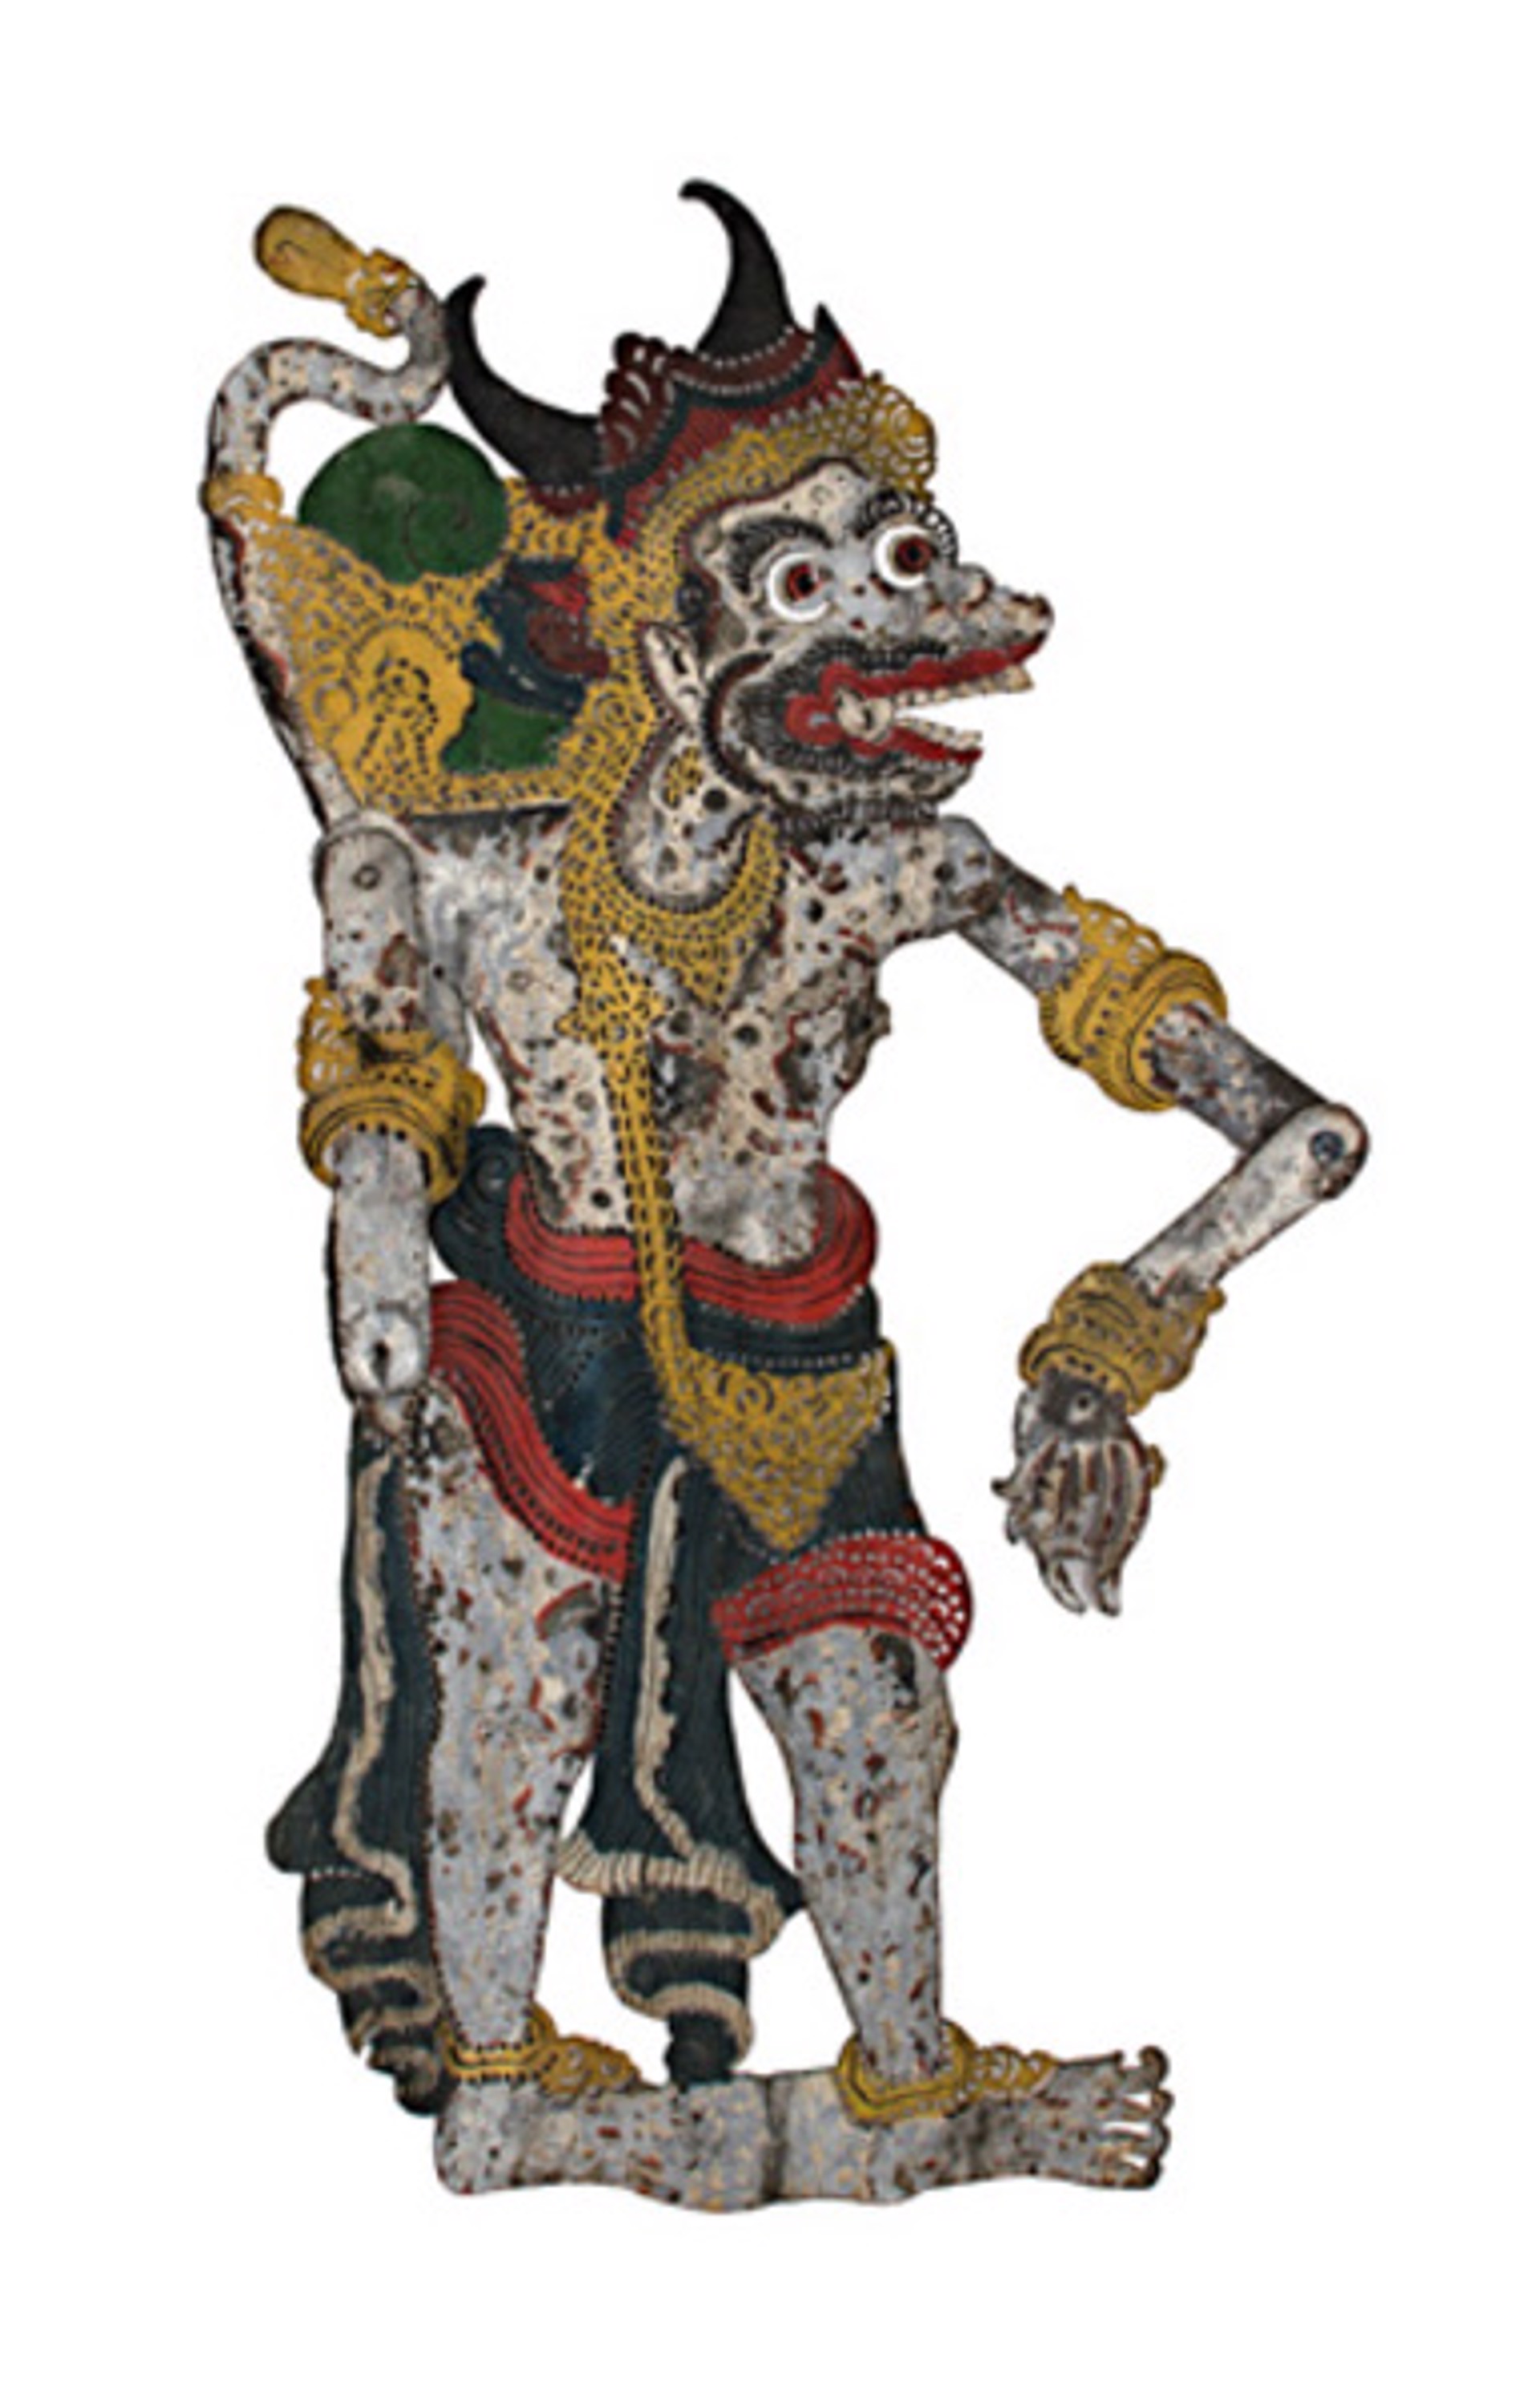 Shadow Puppet Wayang Purwa by Indonesian